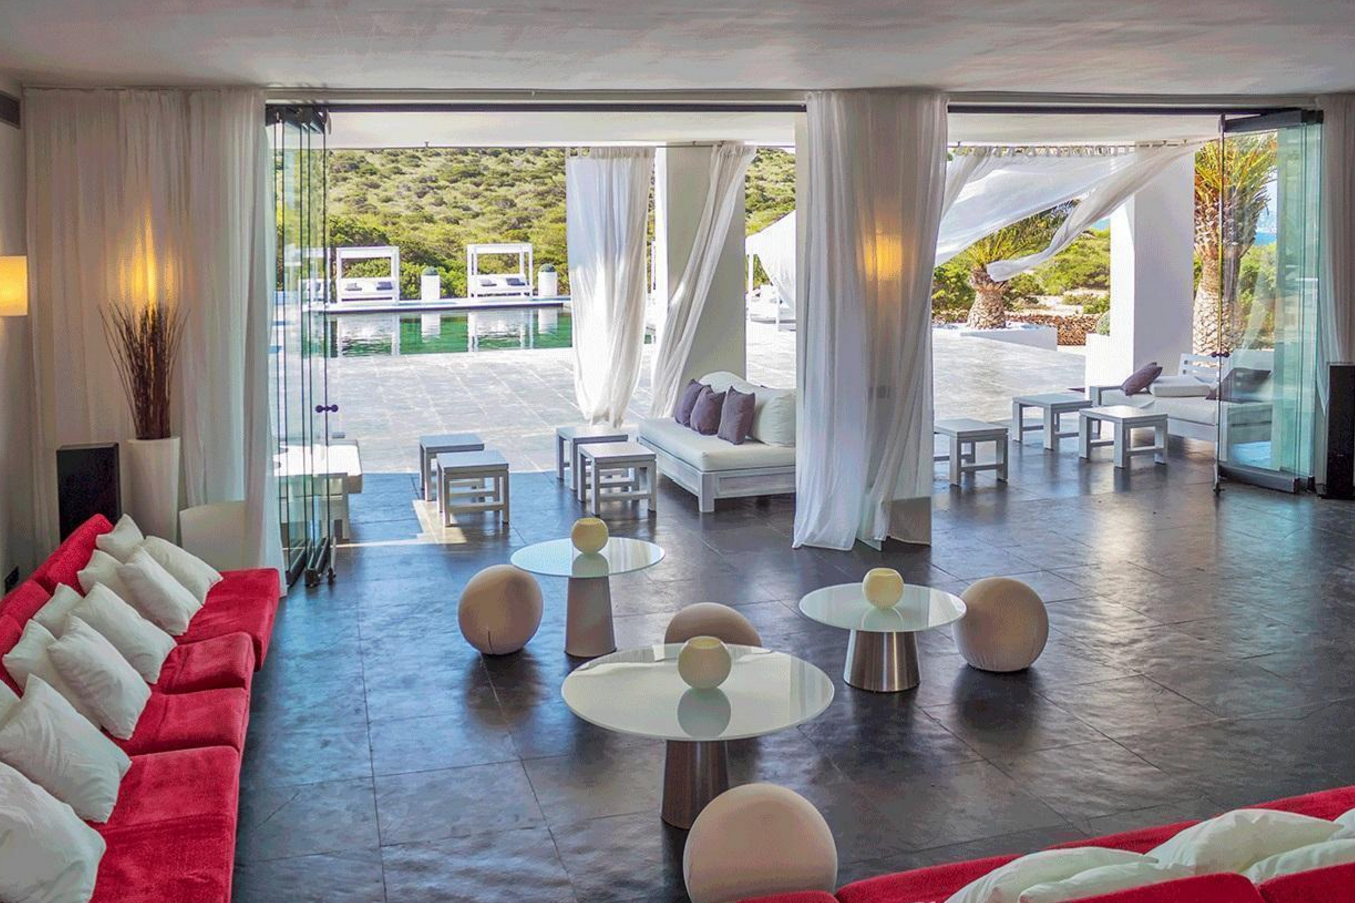 This is Justin Bieber's £84k-a-week party retreat in Ibiza